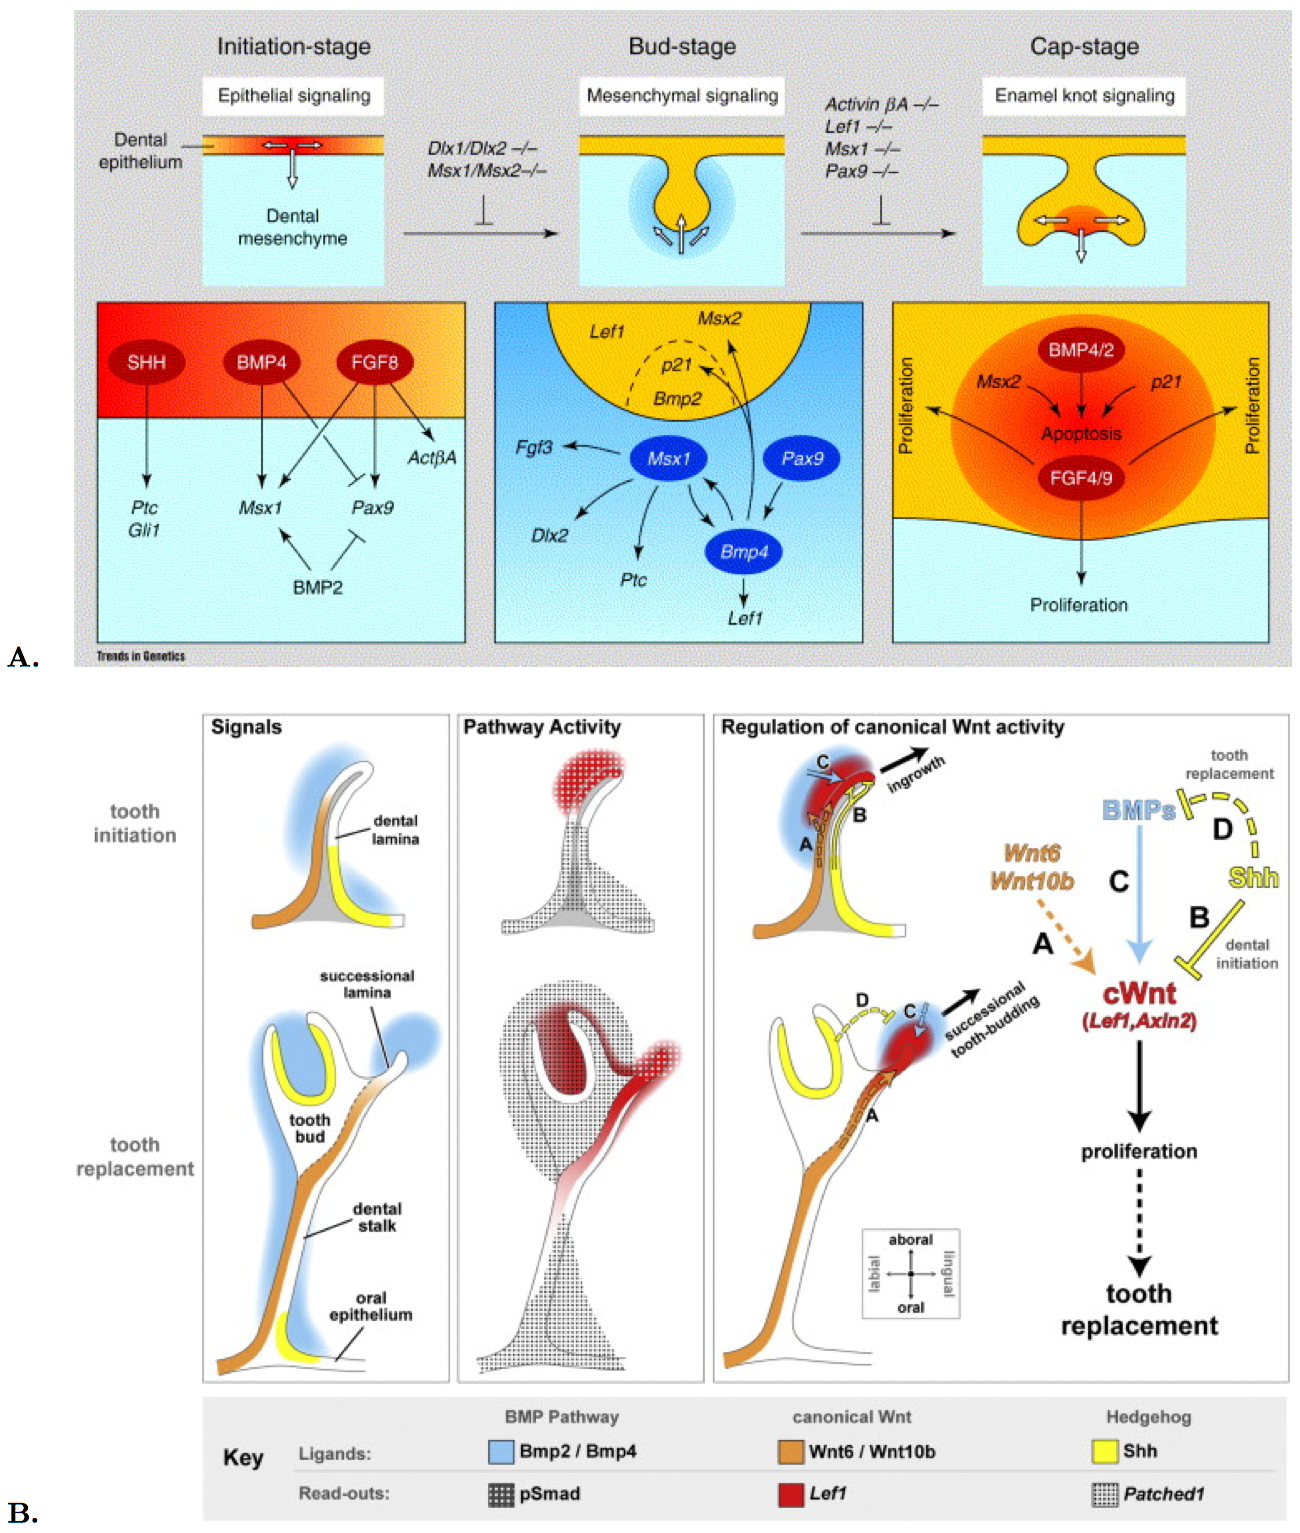 Gene expression and molecular signaling during tooth development in mouse (A) and snake (B).